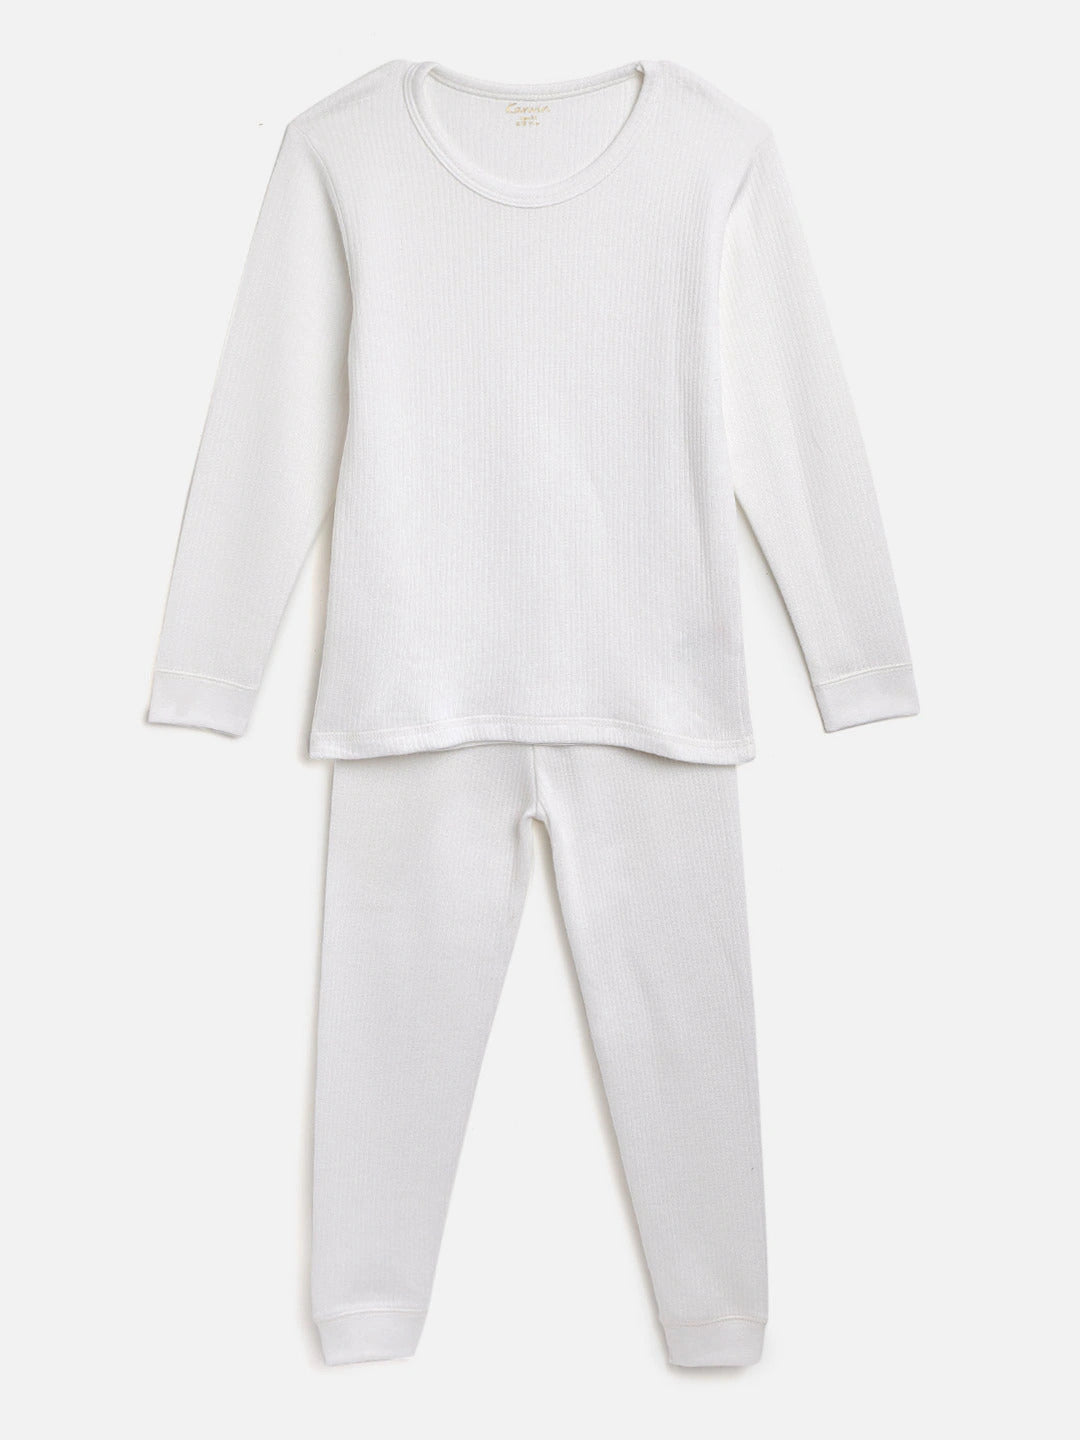 BOYS THERMALS_T2340B2350WHITE